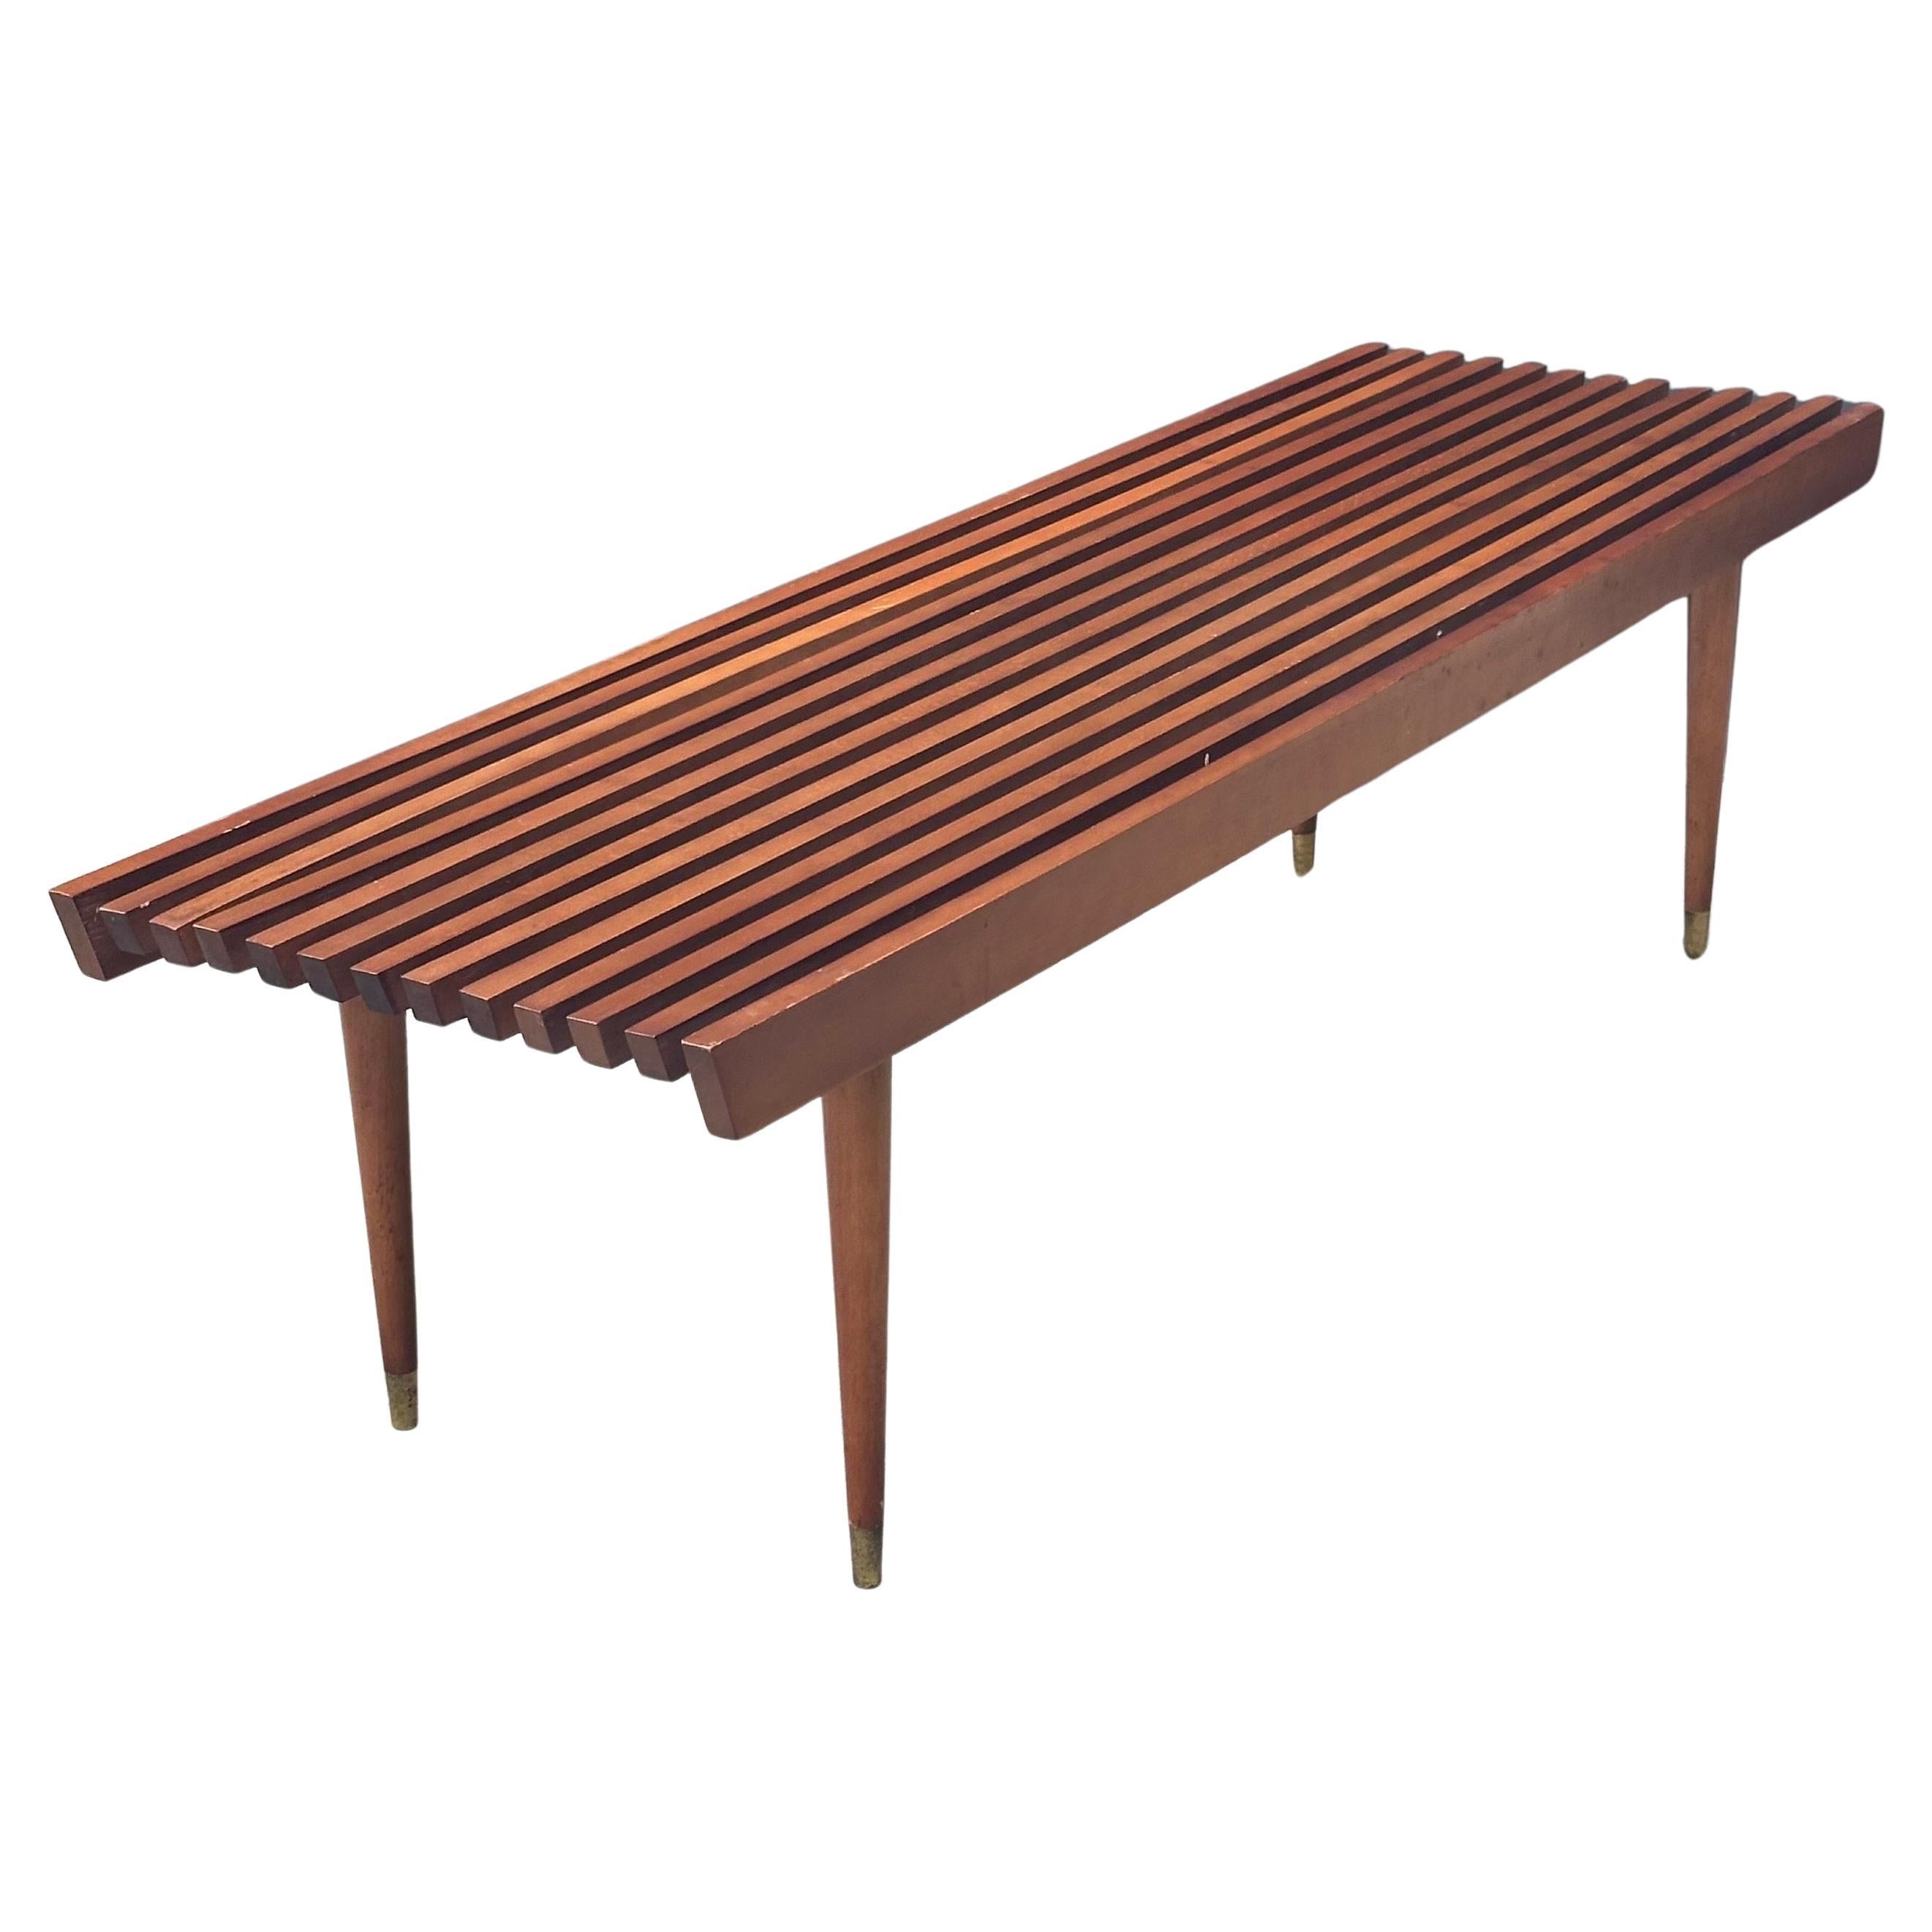 Mid-century solid wood (possibly birch) platform slat bench by Nasco of Yugoslavia, circa 1960s.  The piece is solid and sturdy with brass capped tapered legs that can be removed for easy storage or shipping.  Nice angle edge end cut; can be used